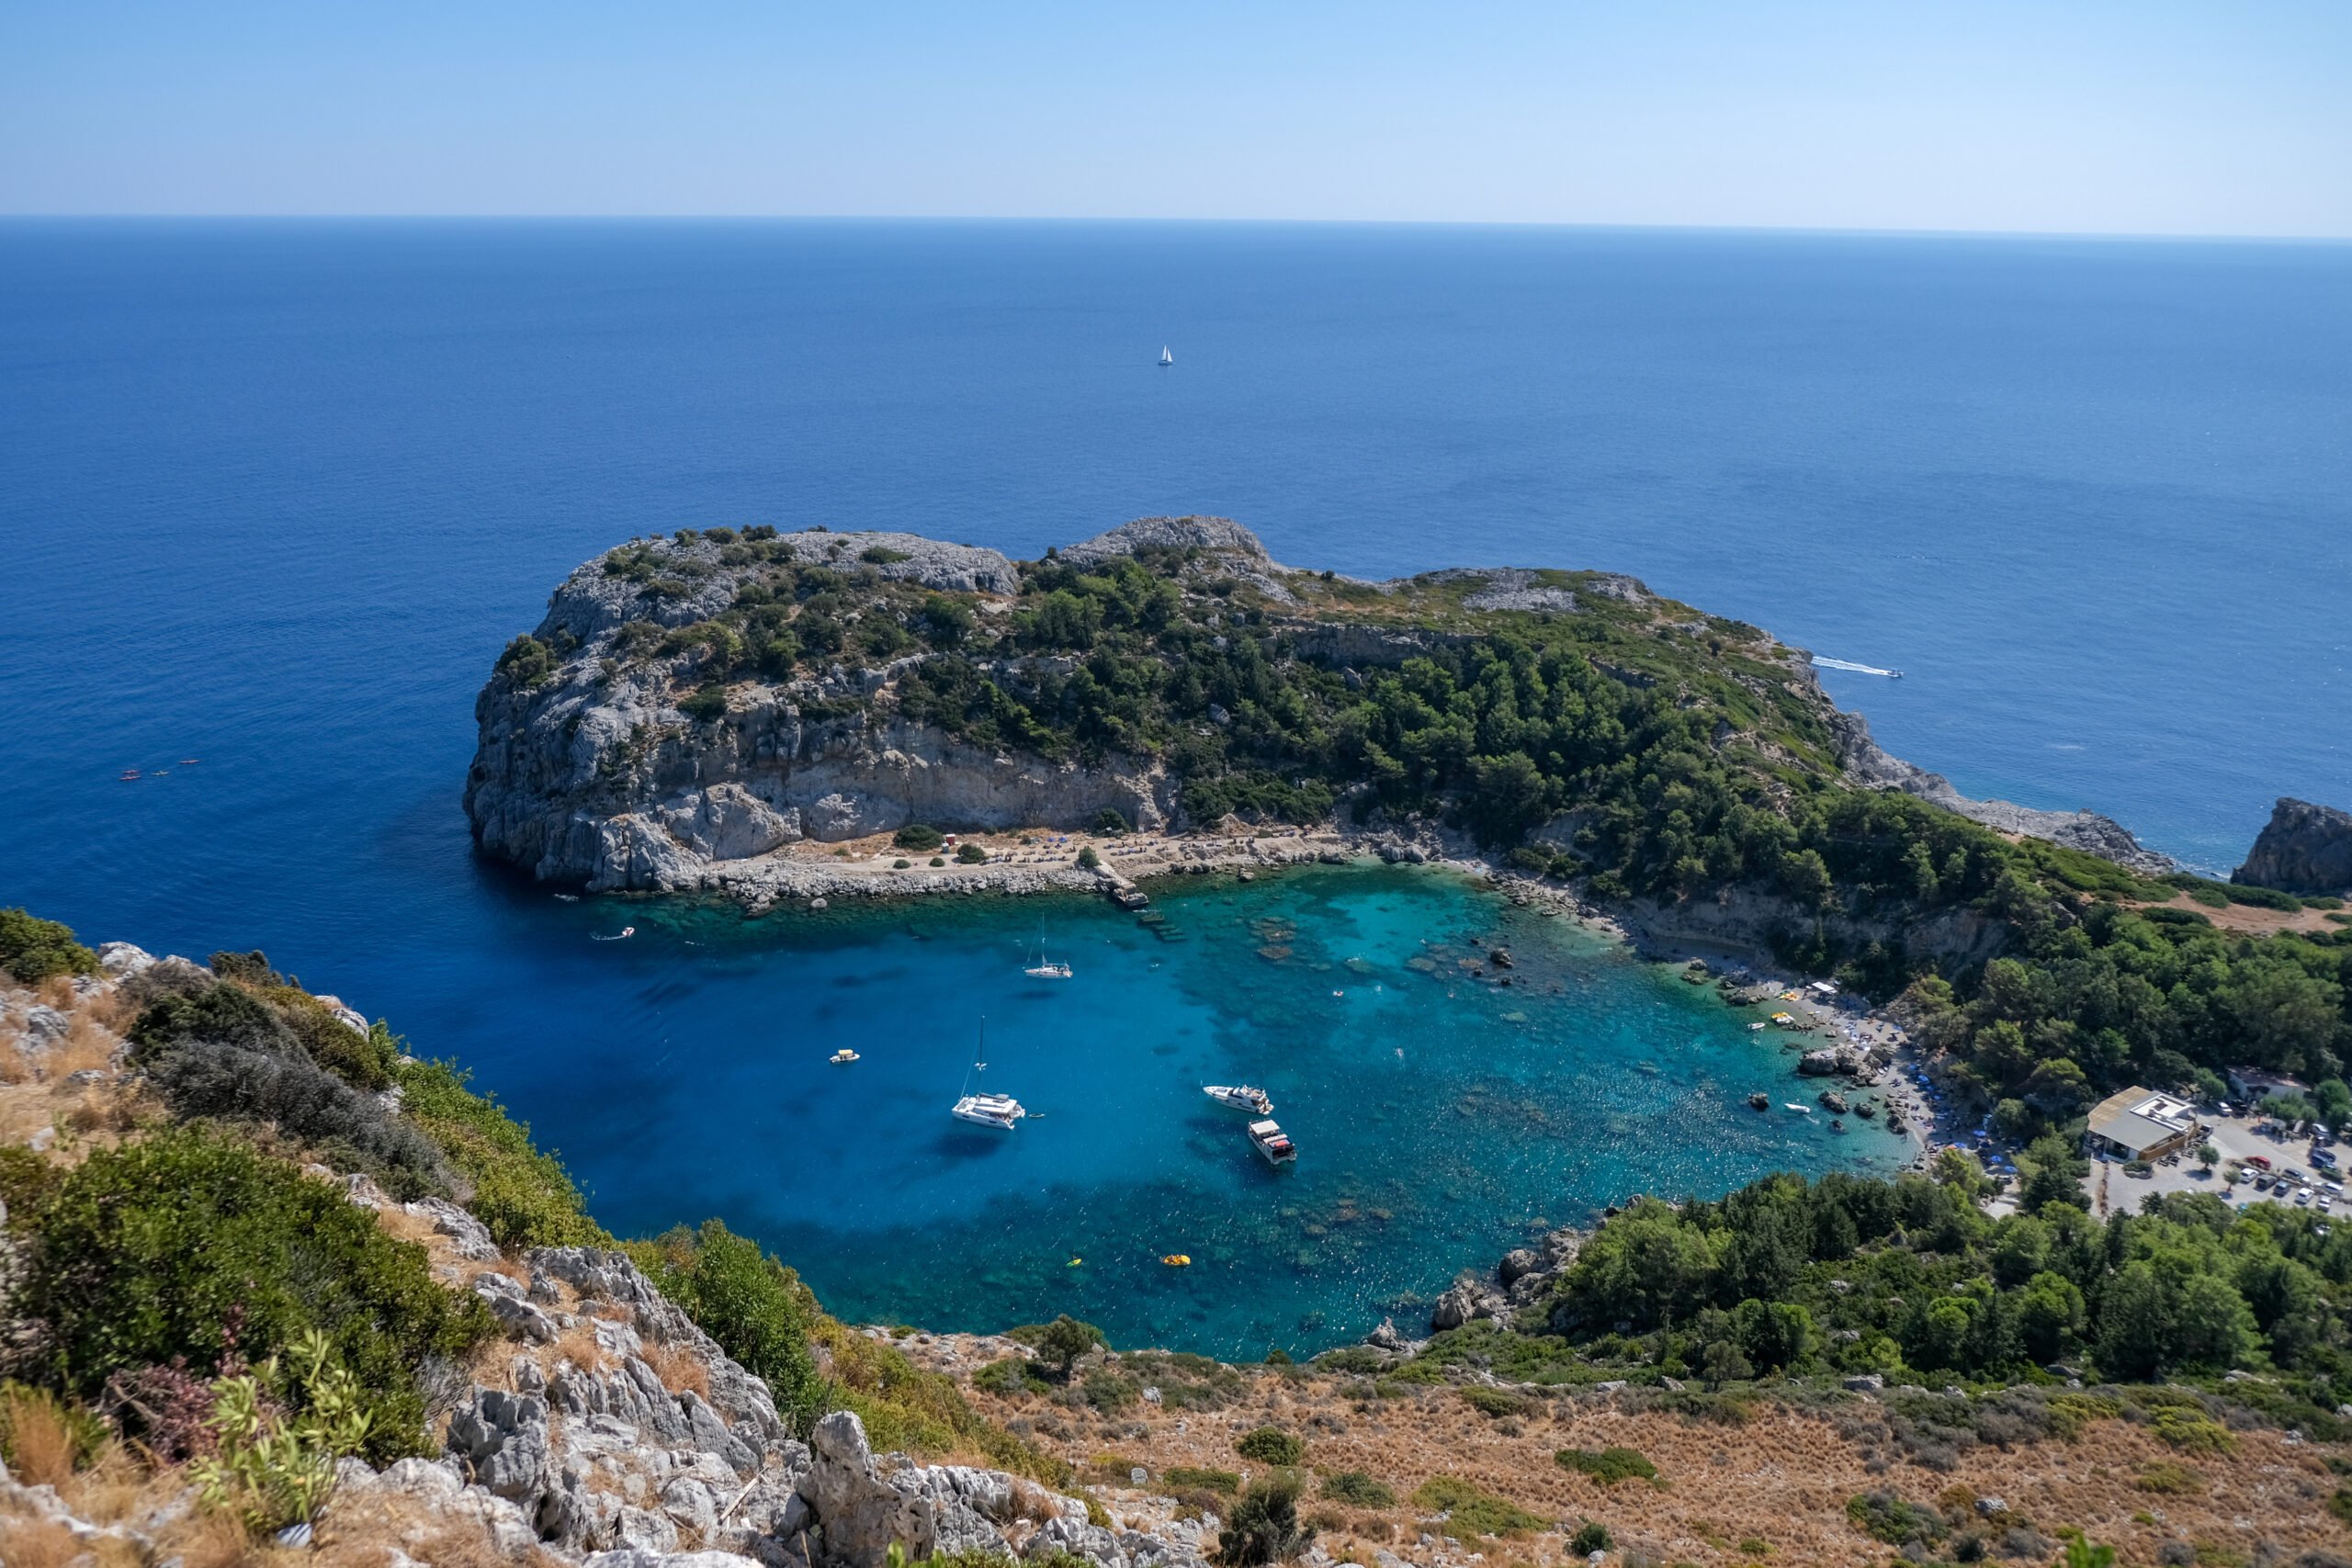 Enjoy Iconic Views Of The Surrounding Islands In Our 9 Day Island Hopping From Rhodes